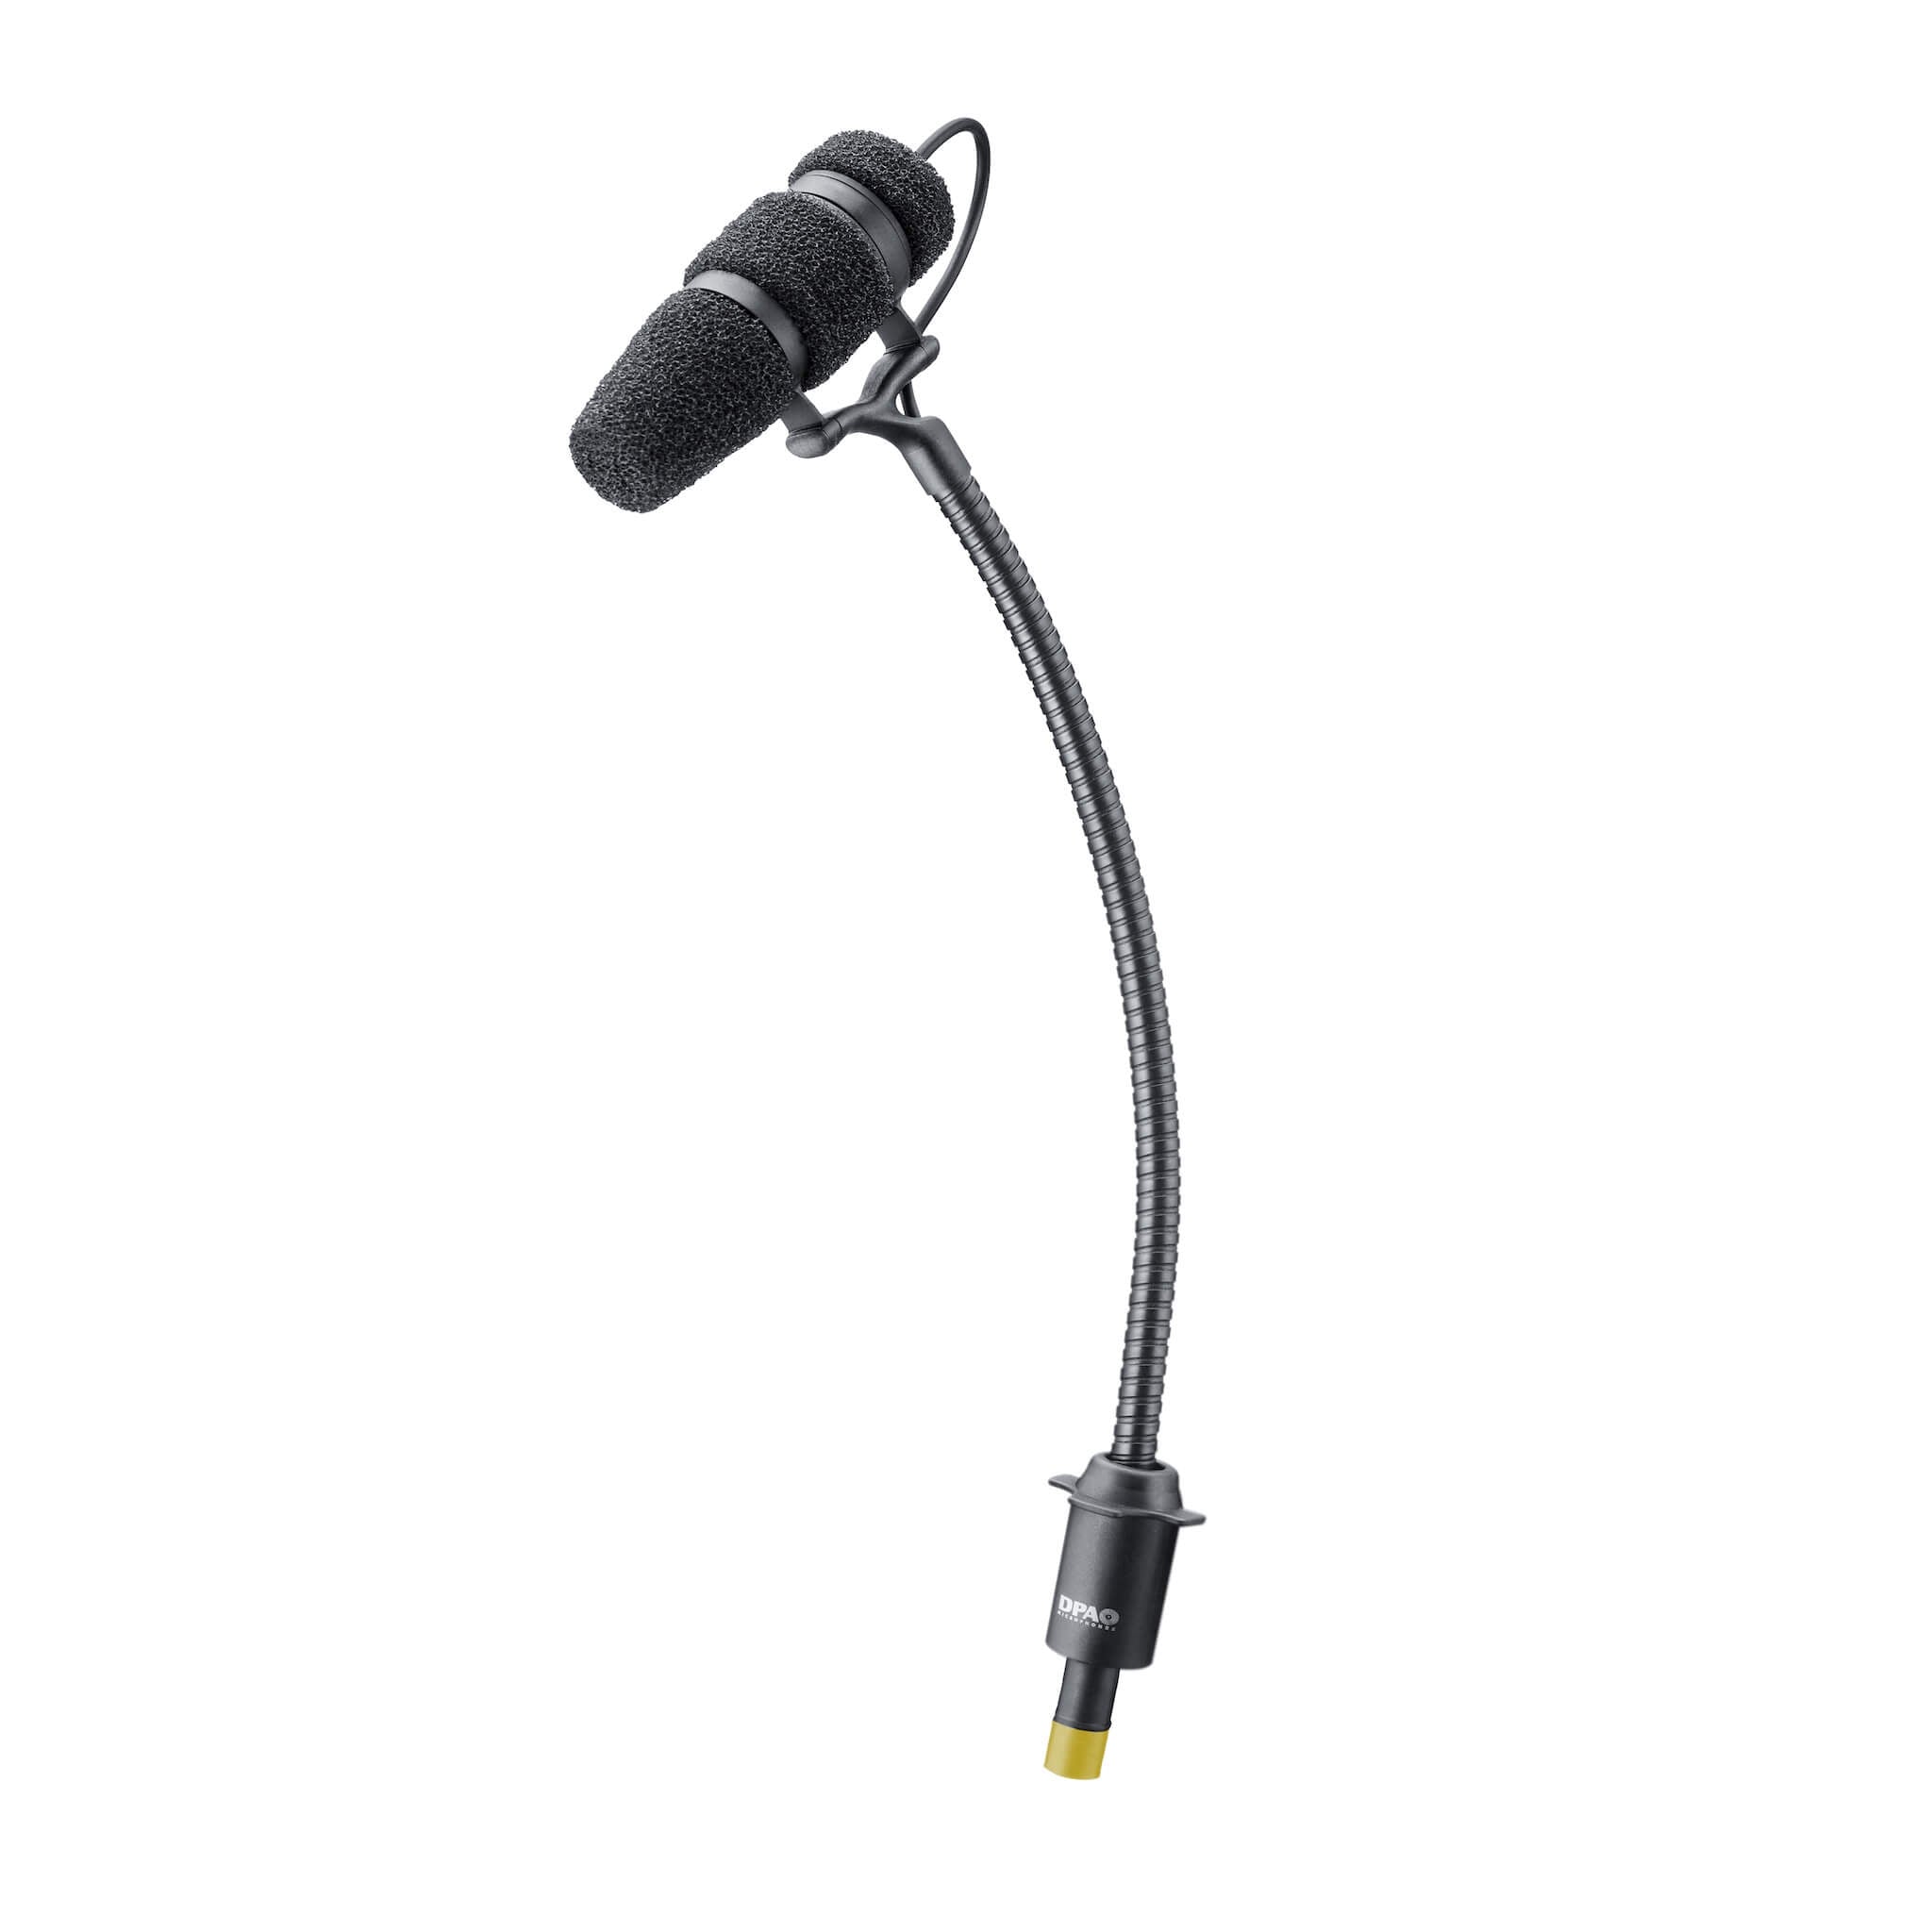 DPA 4099-DC-2 Instrument Microphone for Extreme SPL